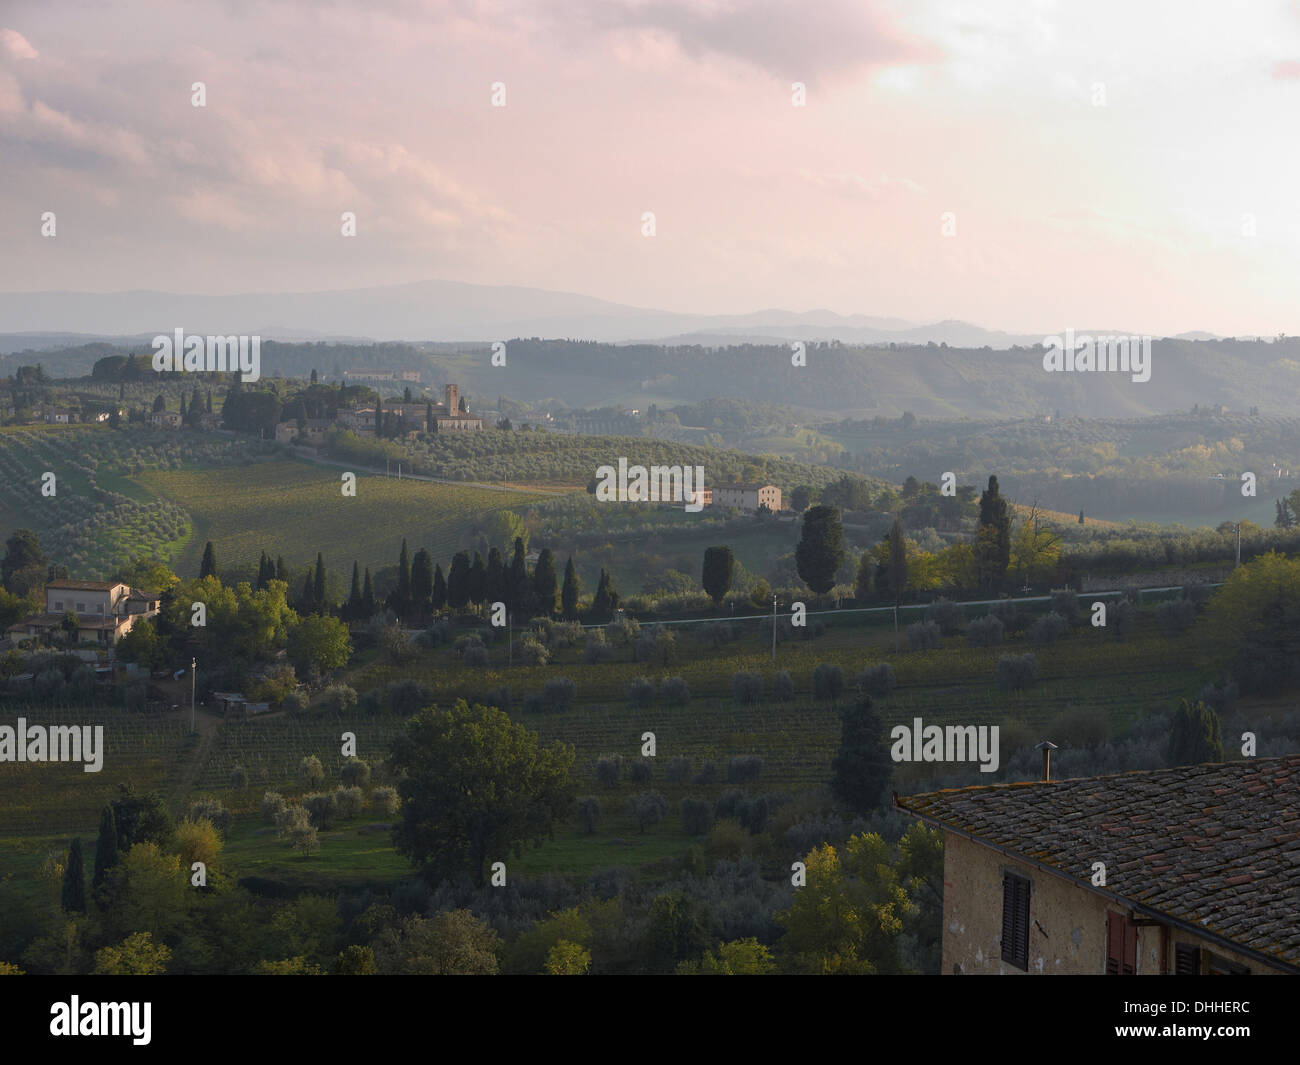 The View from the town of San Gimignano across the tuscan landscape. Tuscany Italy Stock Photo